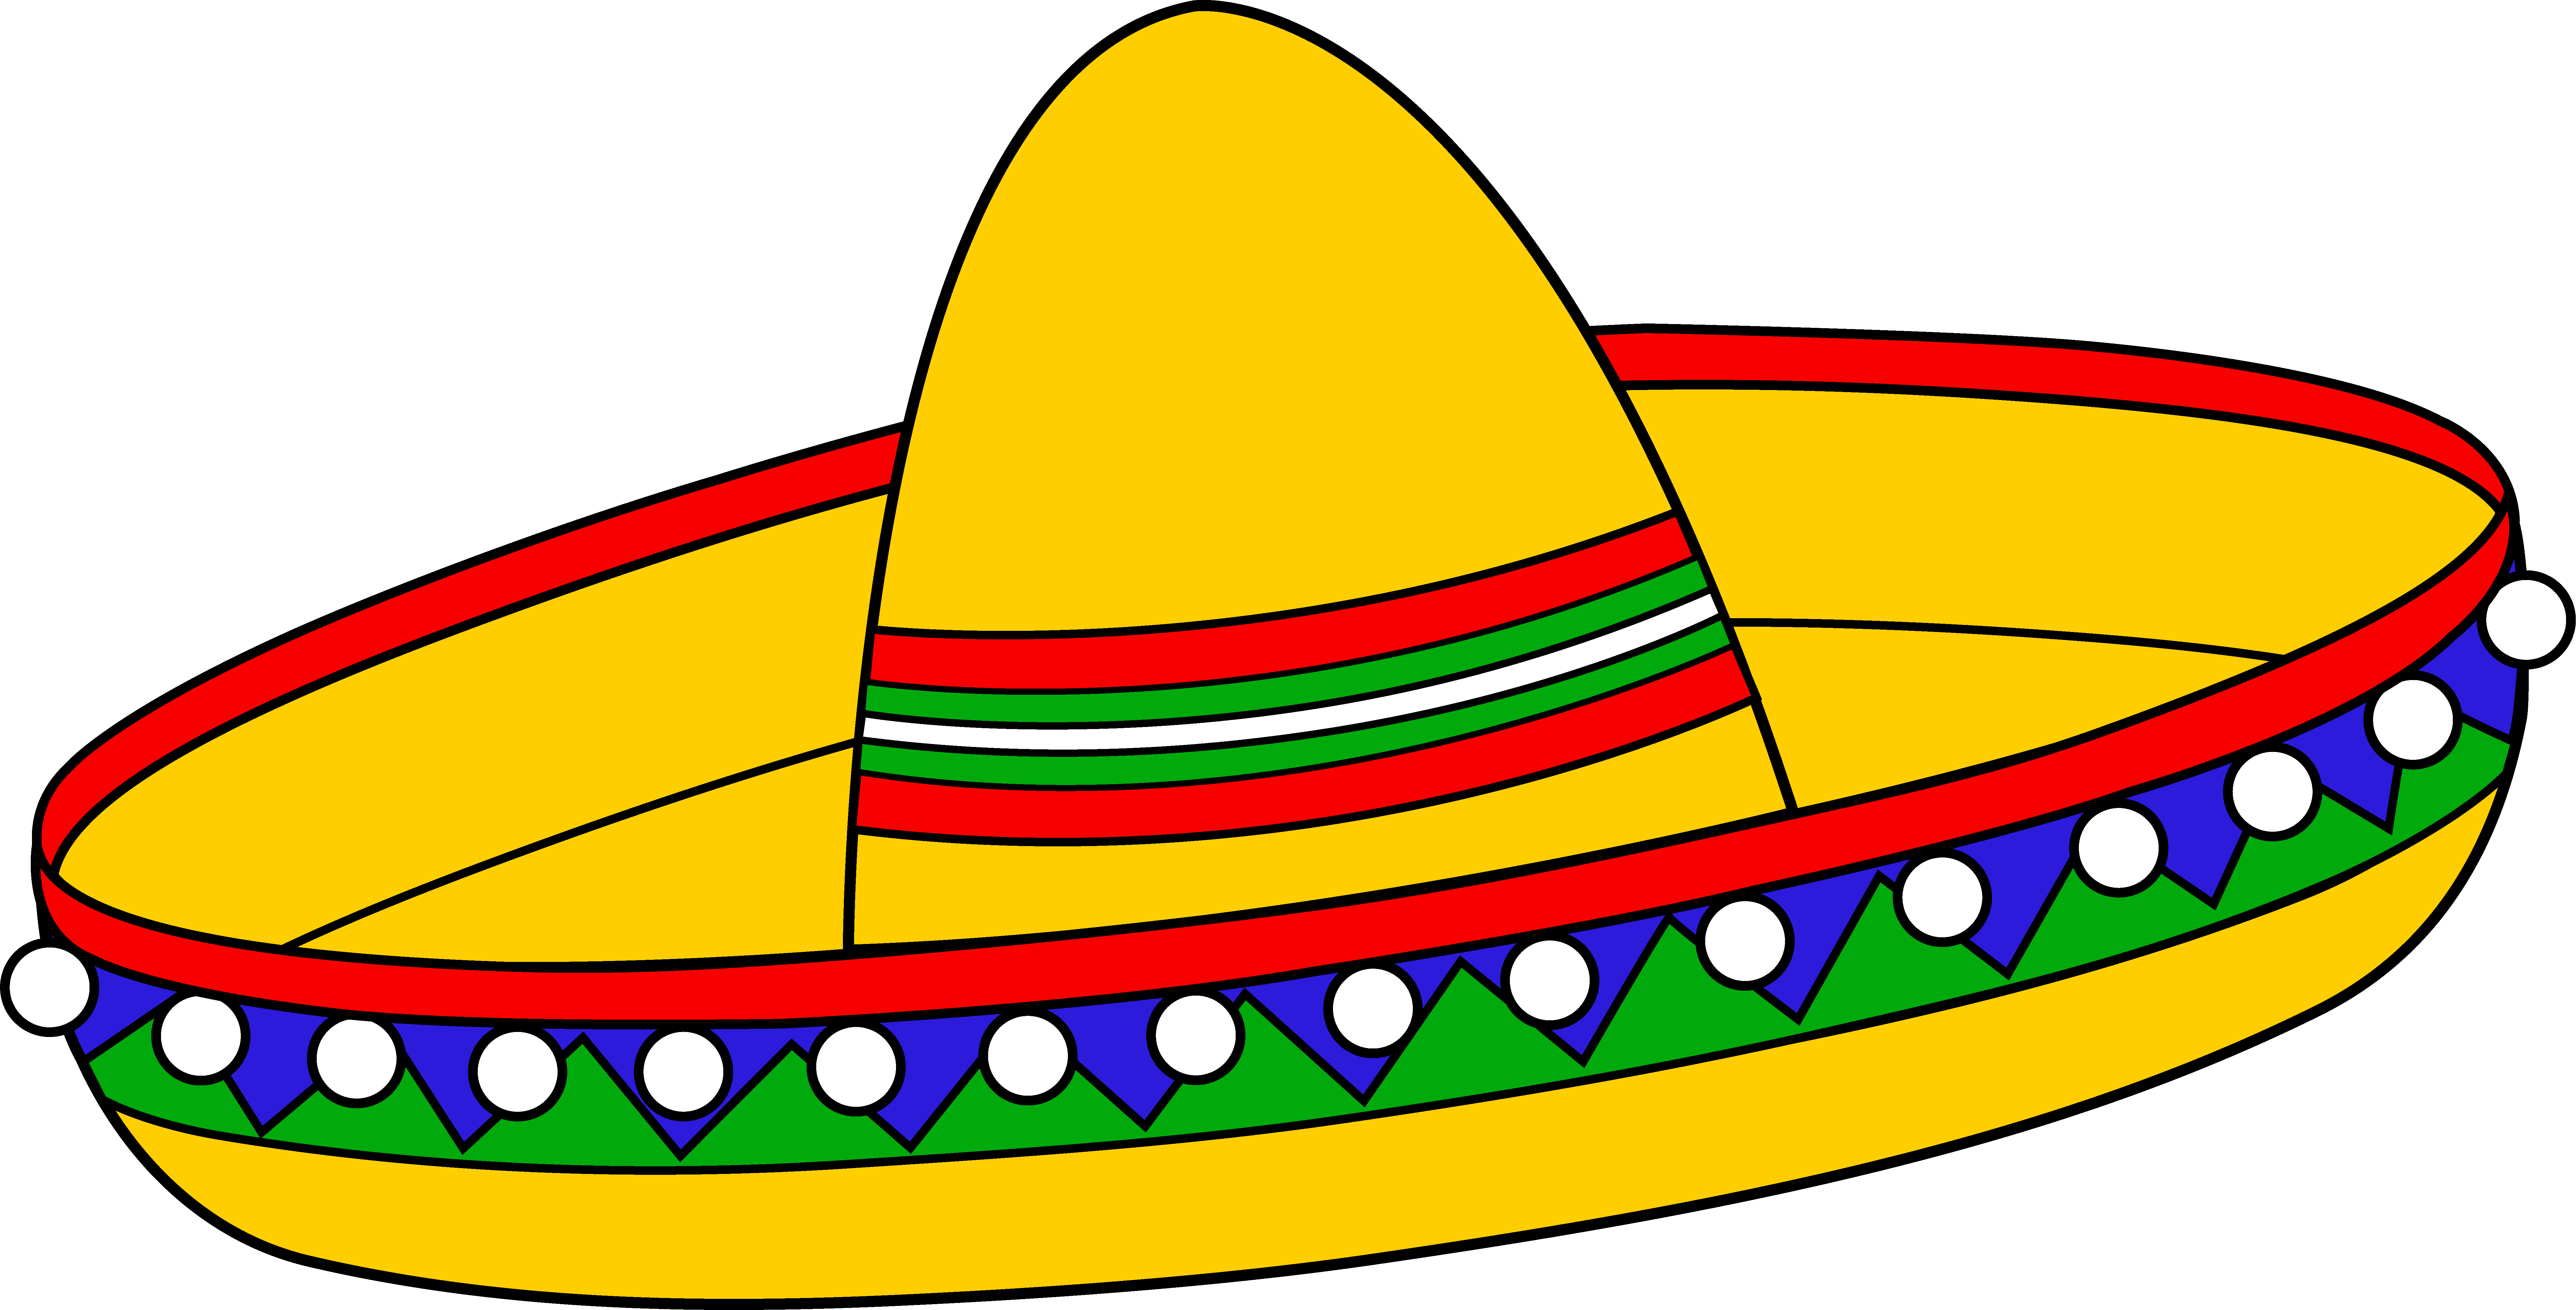 Europe clipart cut out. Colorful mexican sombrero hat